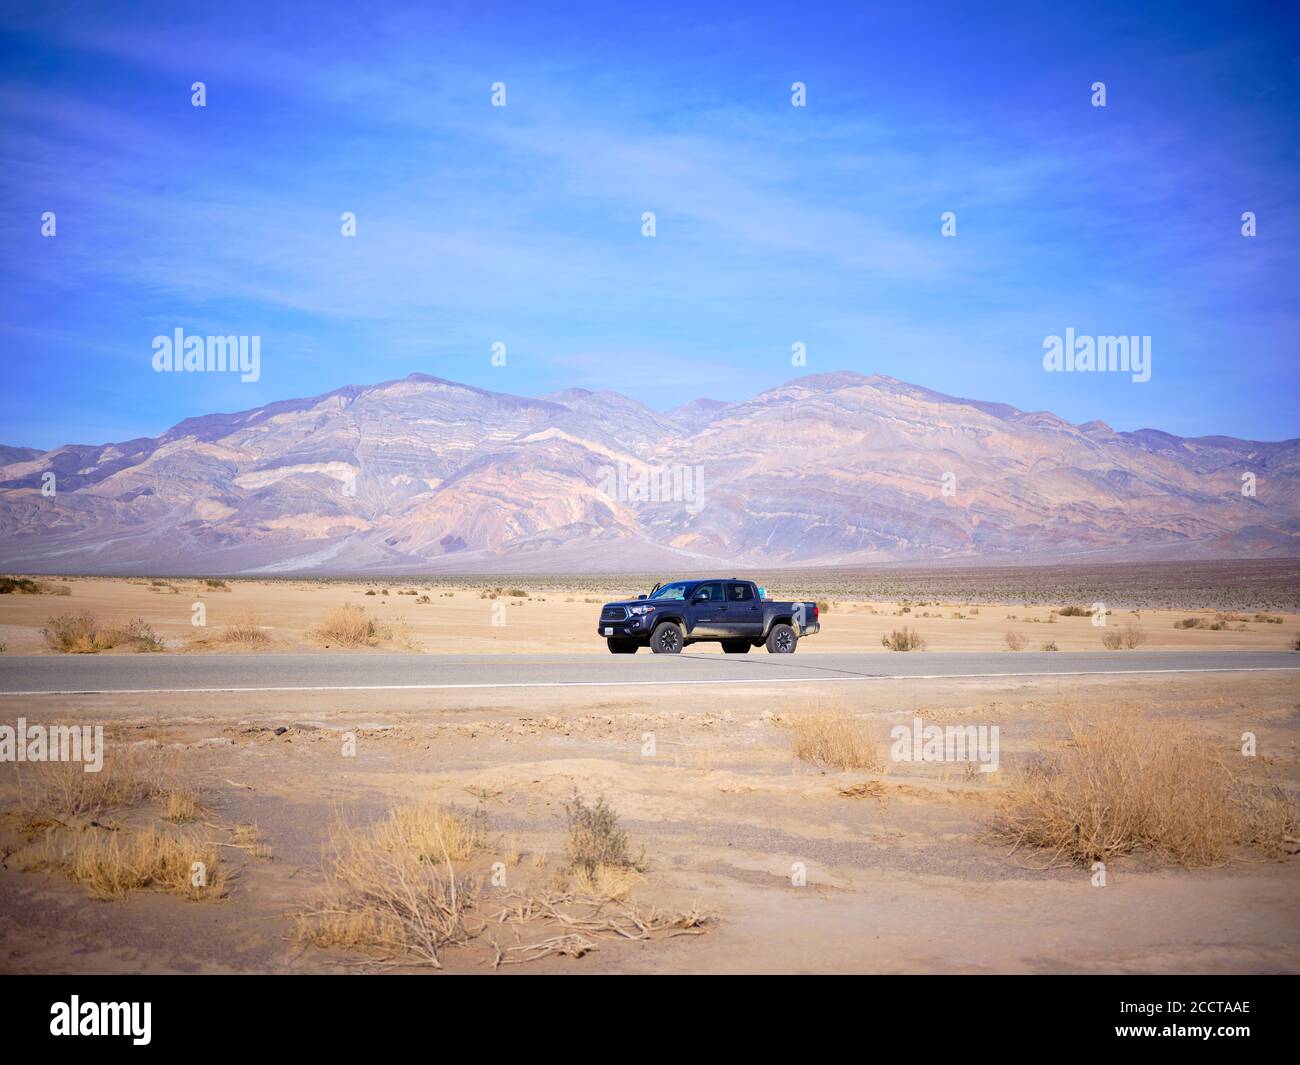 A toyota truck parked on the side of a desert highway, Death Valley. Stock Photo